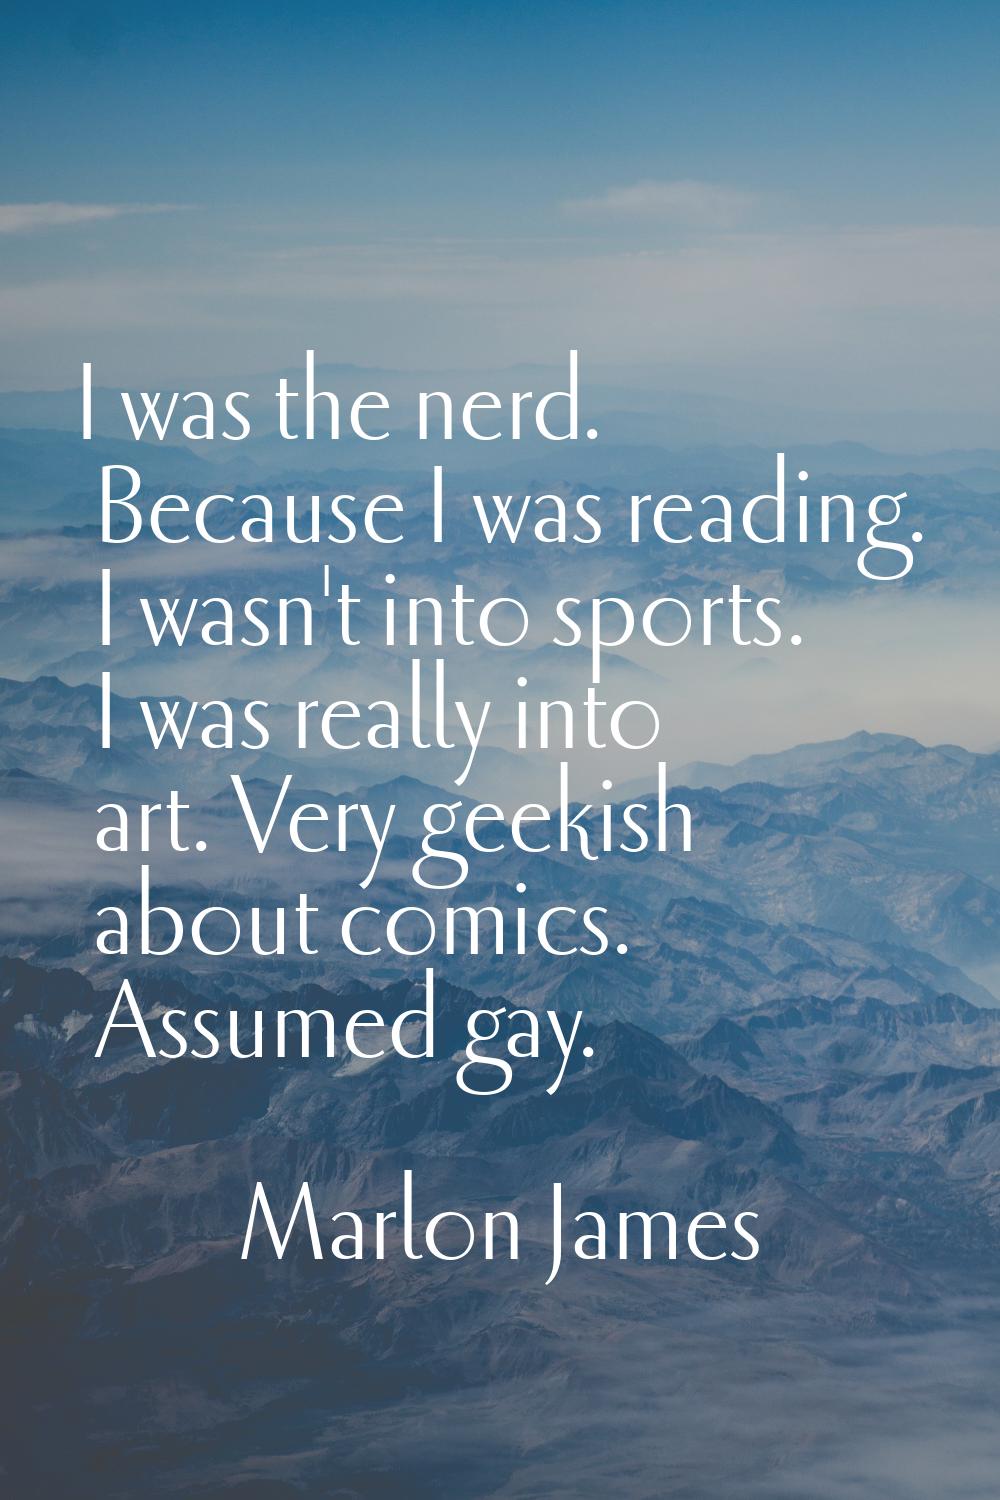 I was the nerd. Because I was reading. I wasn't into sports. I was really into art. Very geekish ab